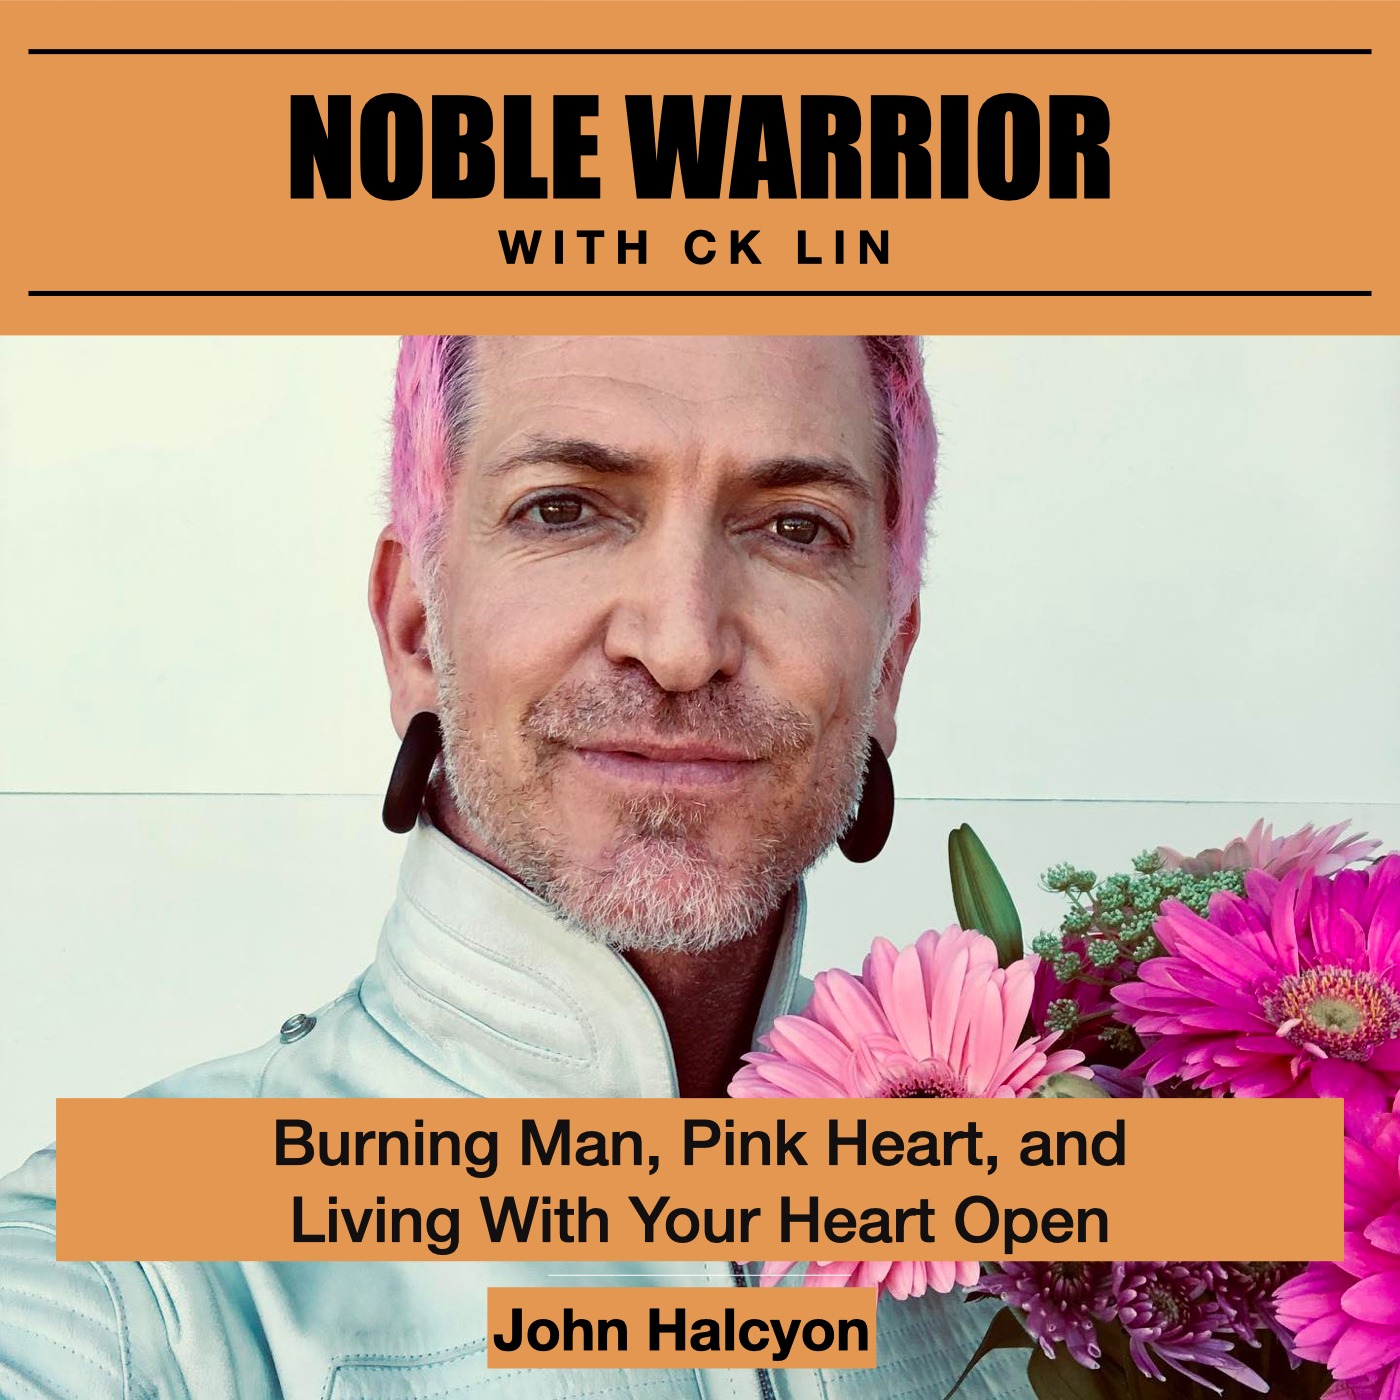 157 John Halcyon: Burning Man, Pink Heart, and Living With Your Heart Open Image